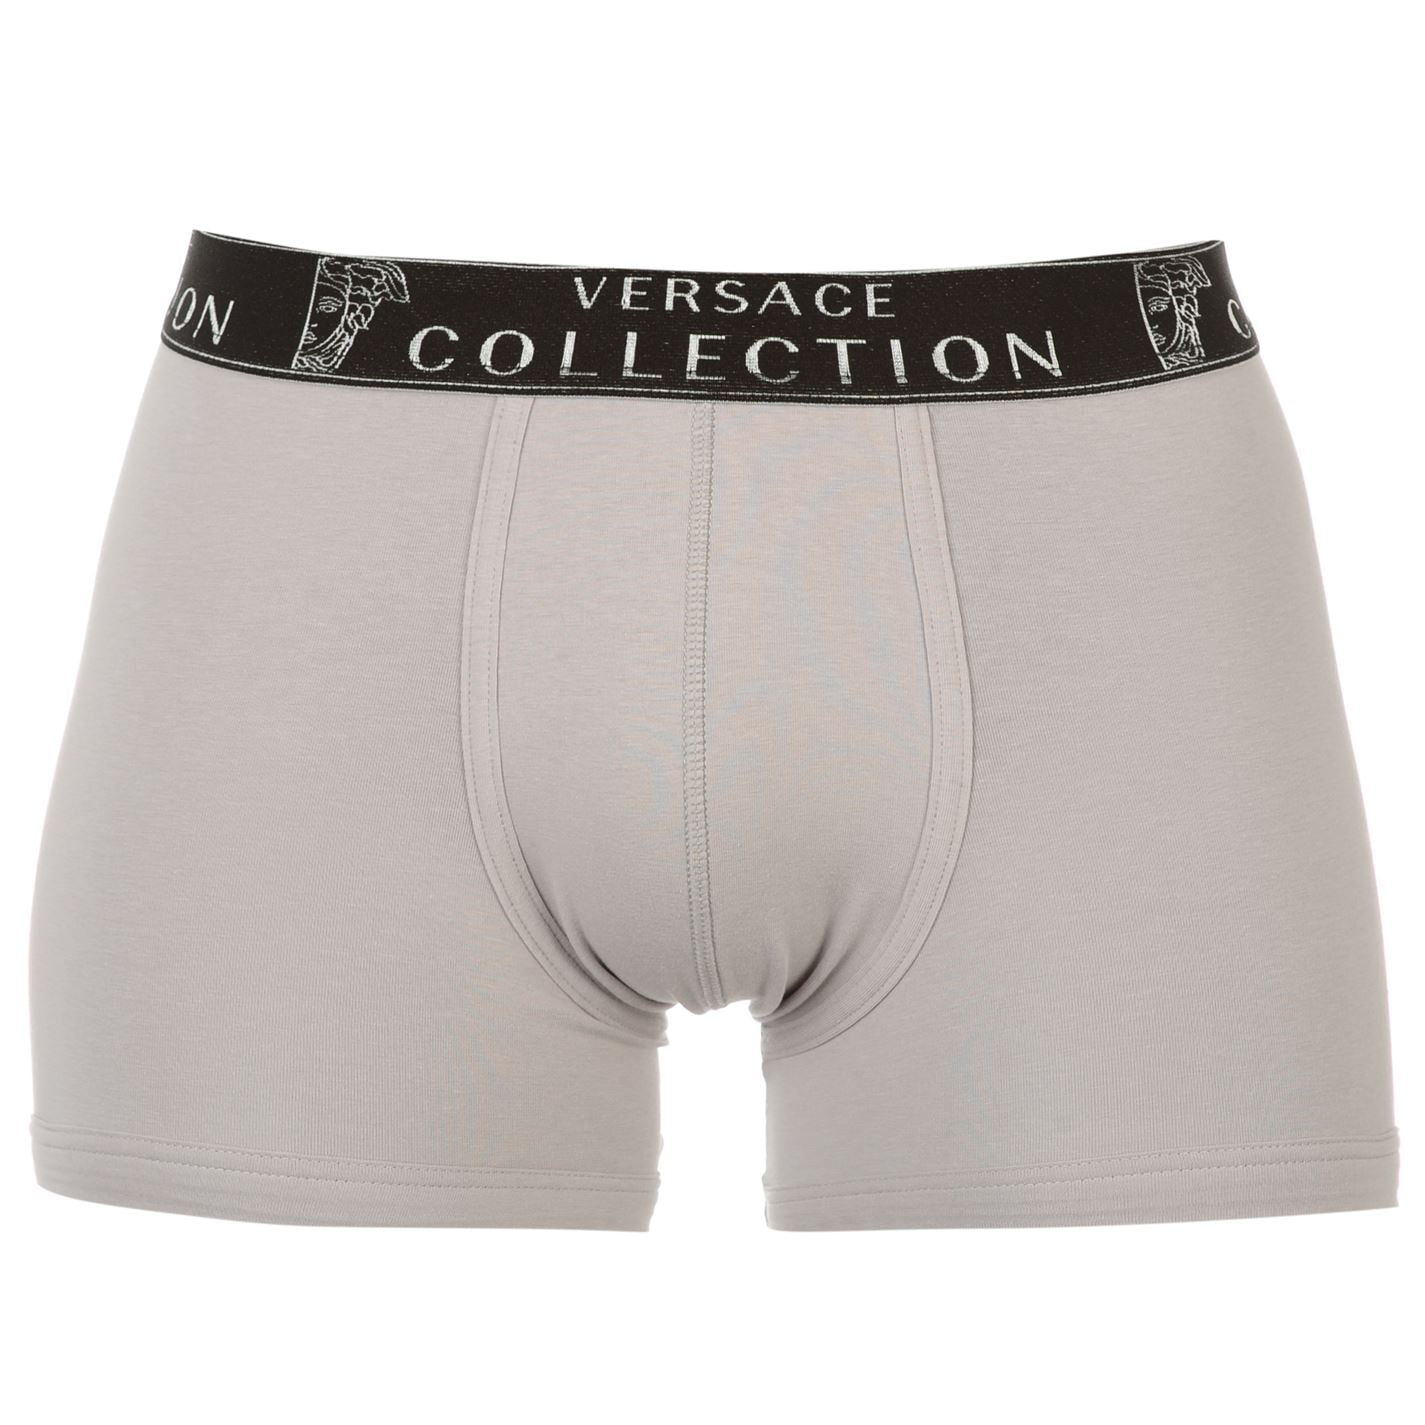 versace collection boxers